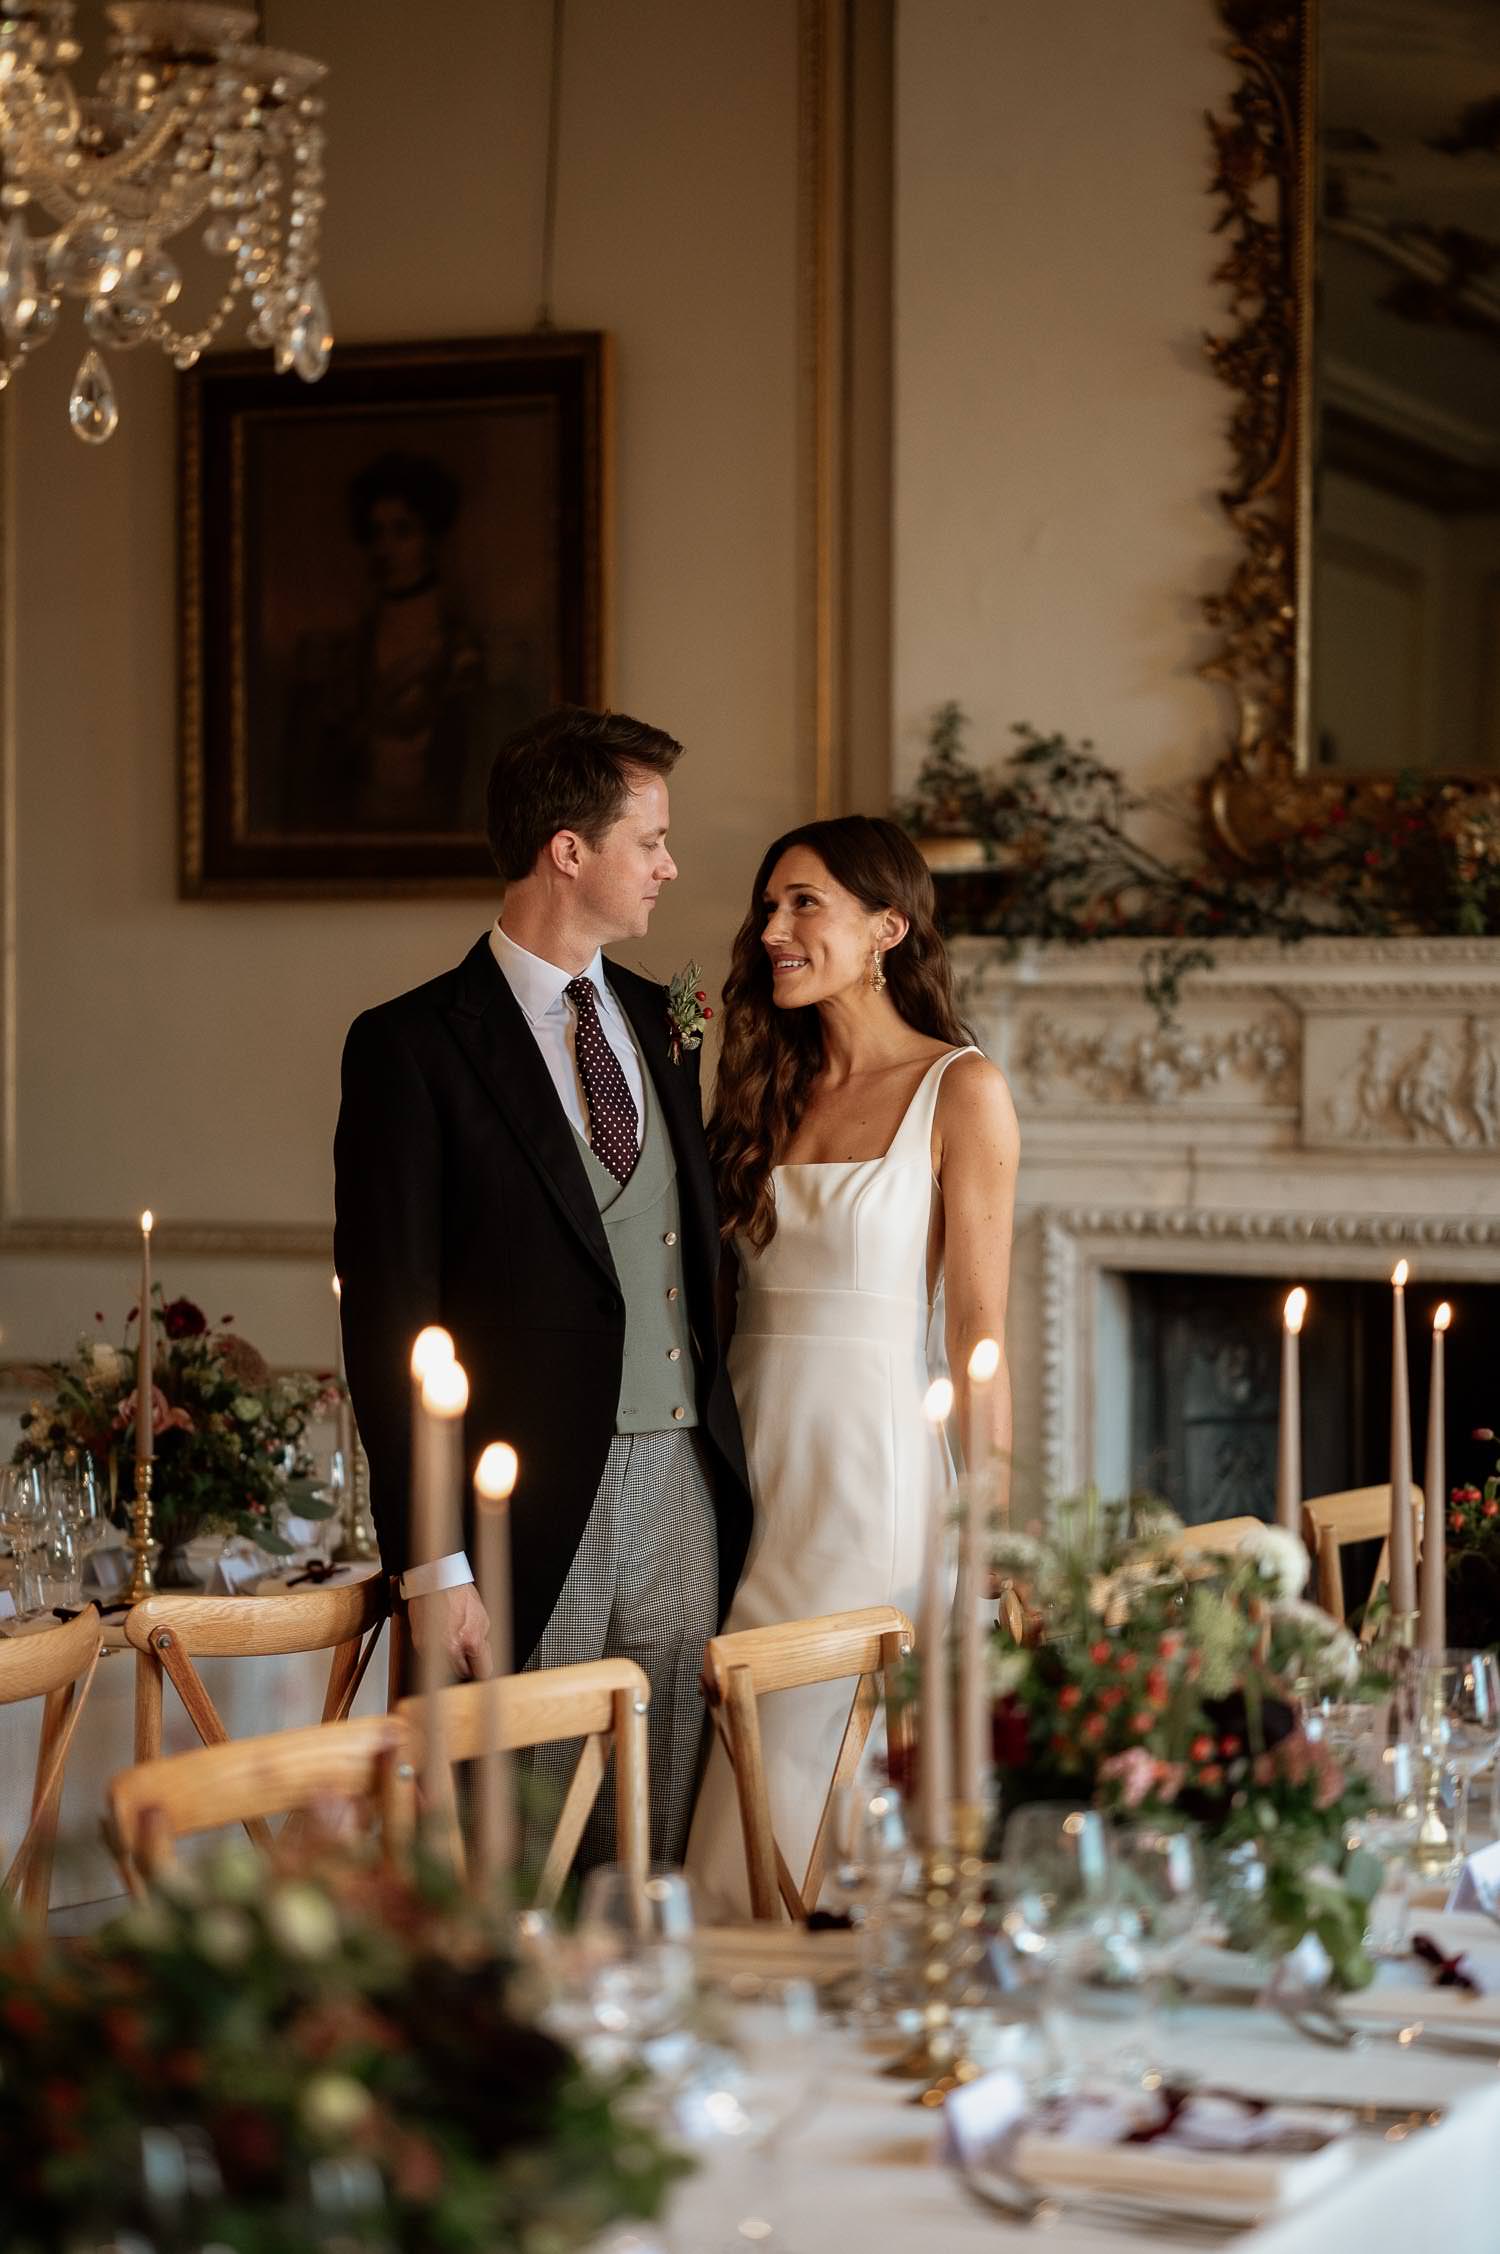 Bride and groom in the Drawing room at a Came House wedding by Sophia Veres Photography.